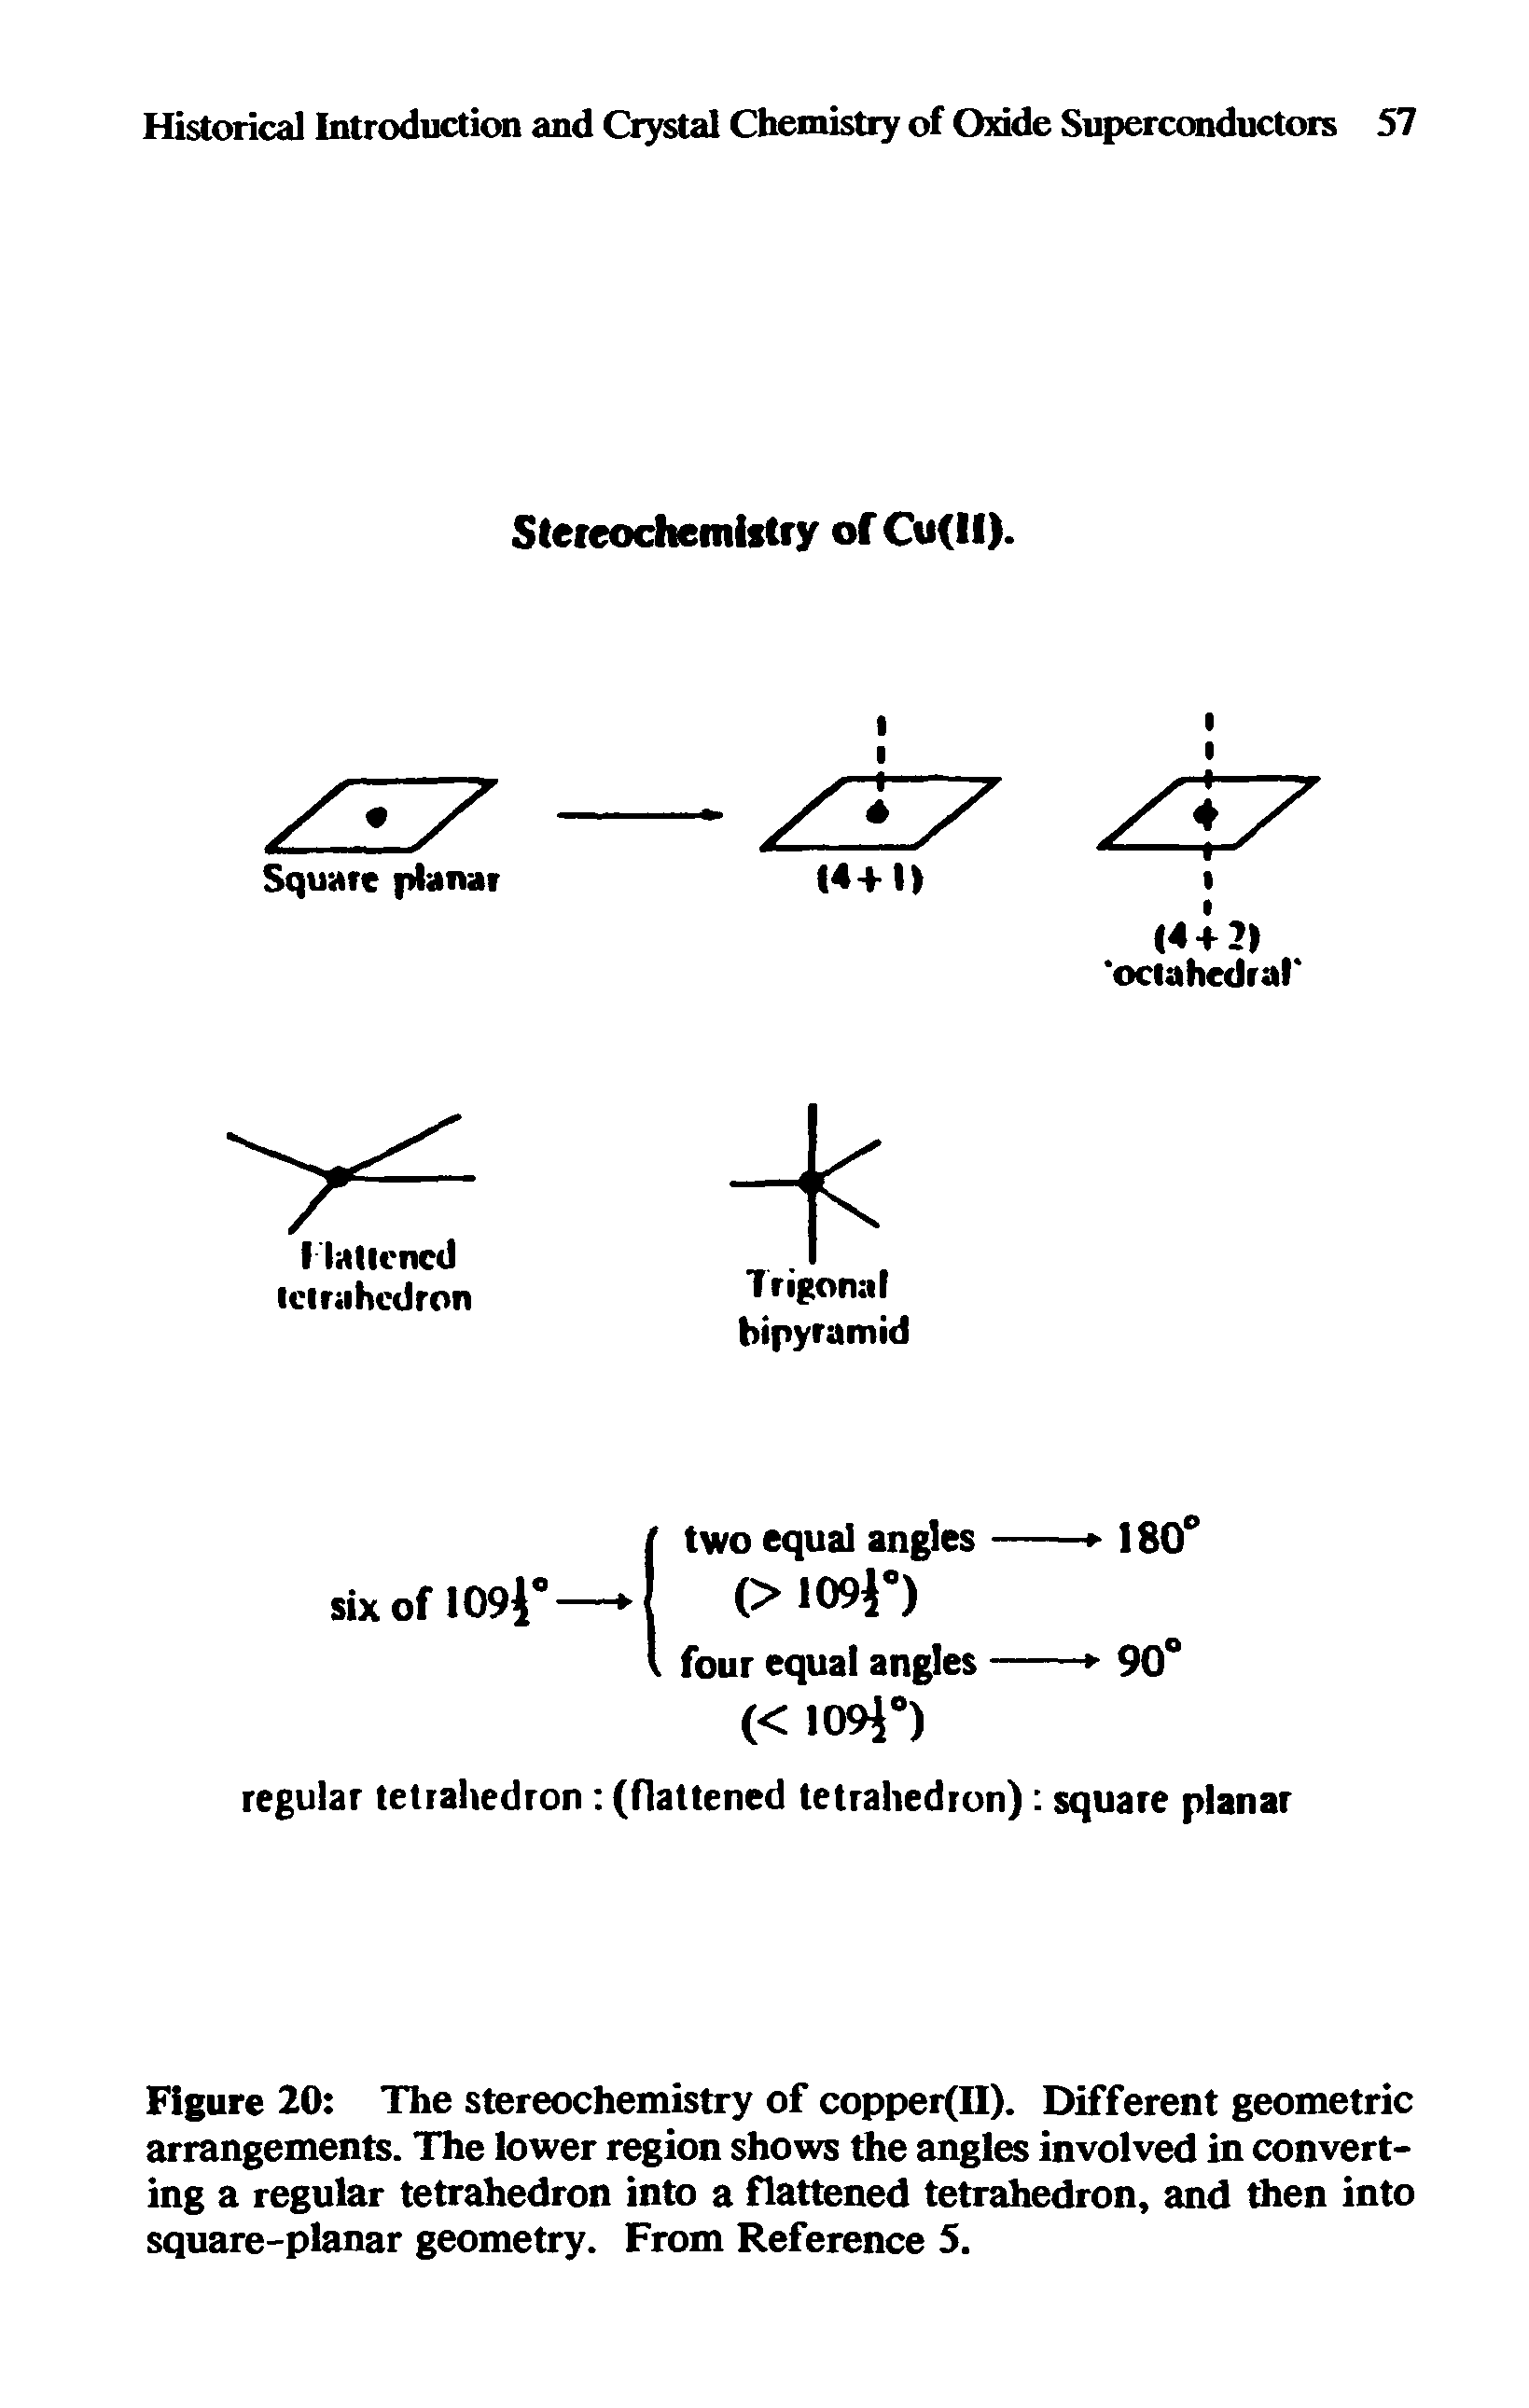 Figure 20 The stereochemistry of copper(II). Different geometric arrangements. The lower region shows the angles involved in converting a regular tetrahedron into a flattened tetrahedron, and then into square-planar geometry. From Reference 5.